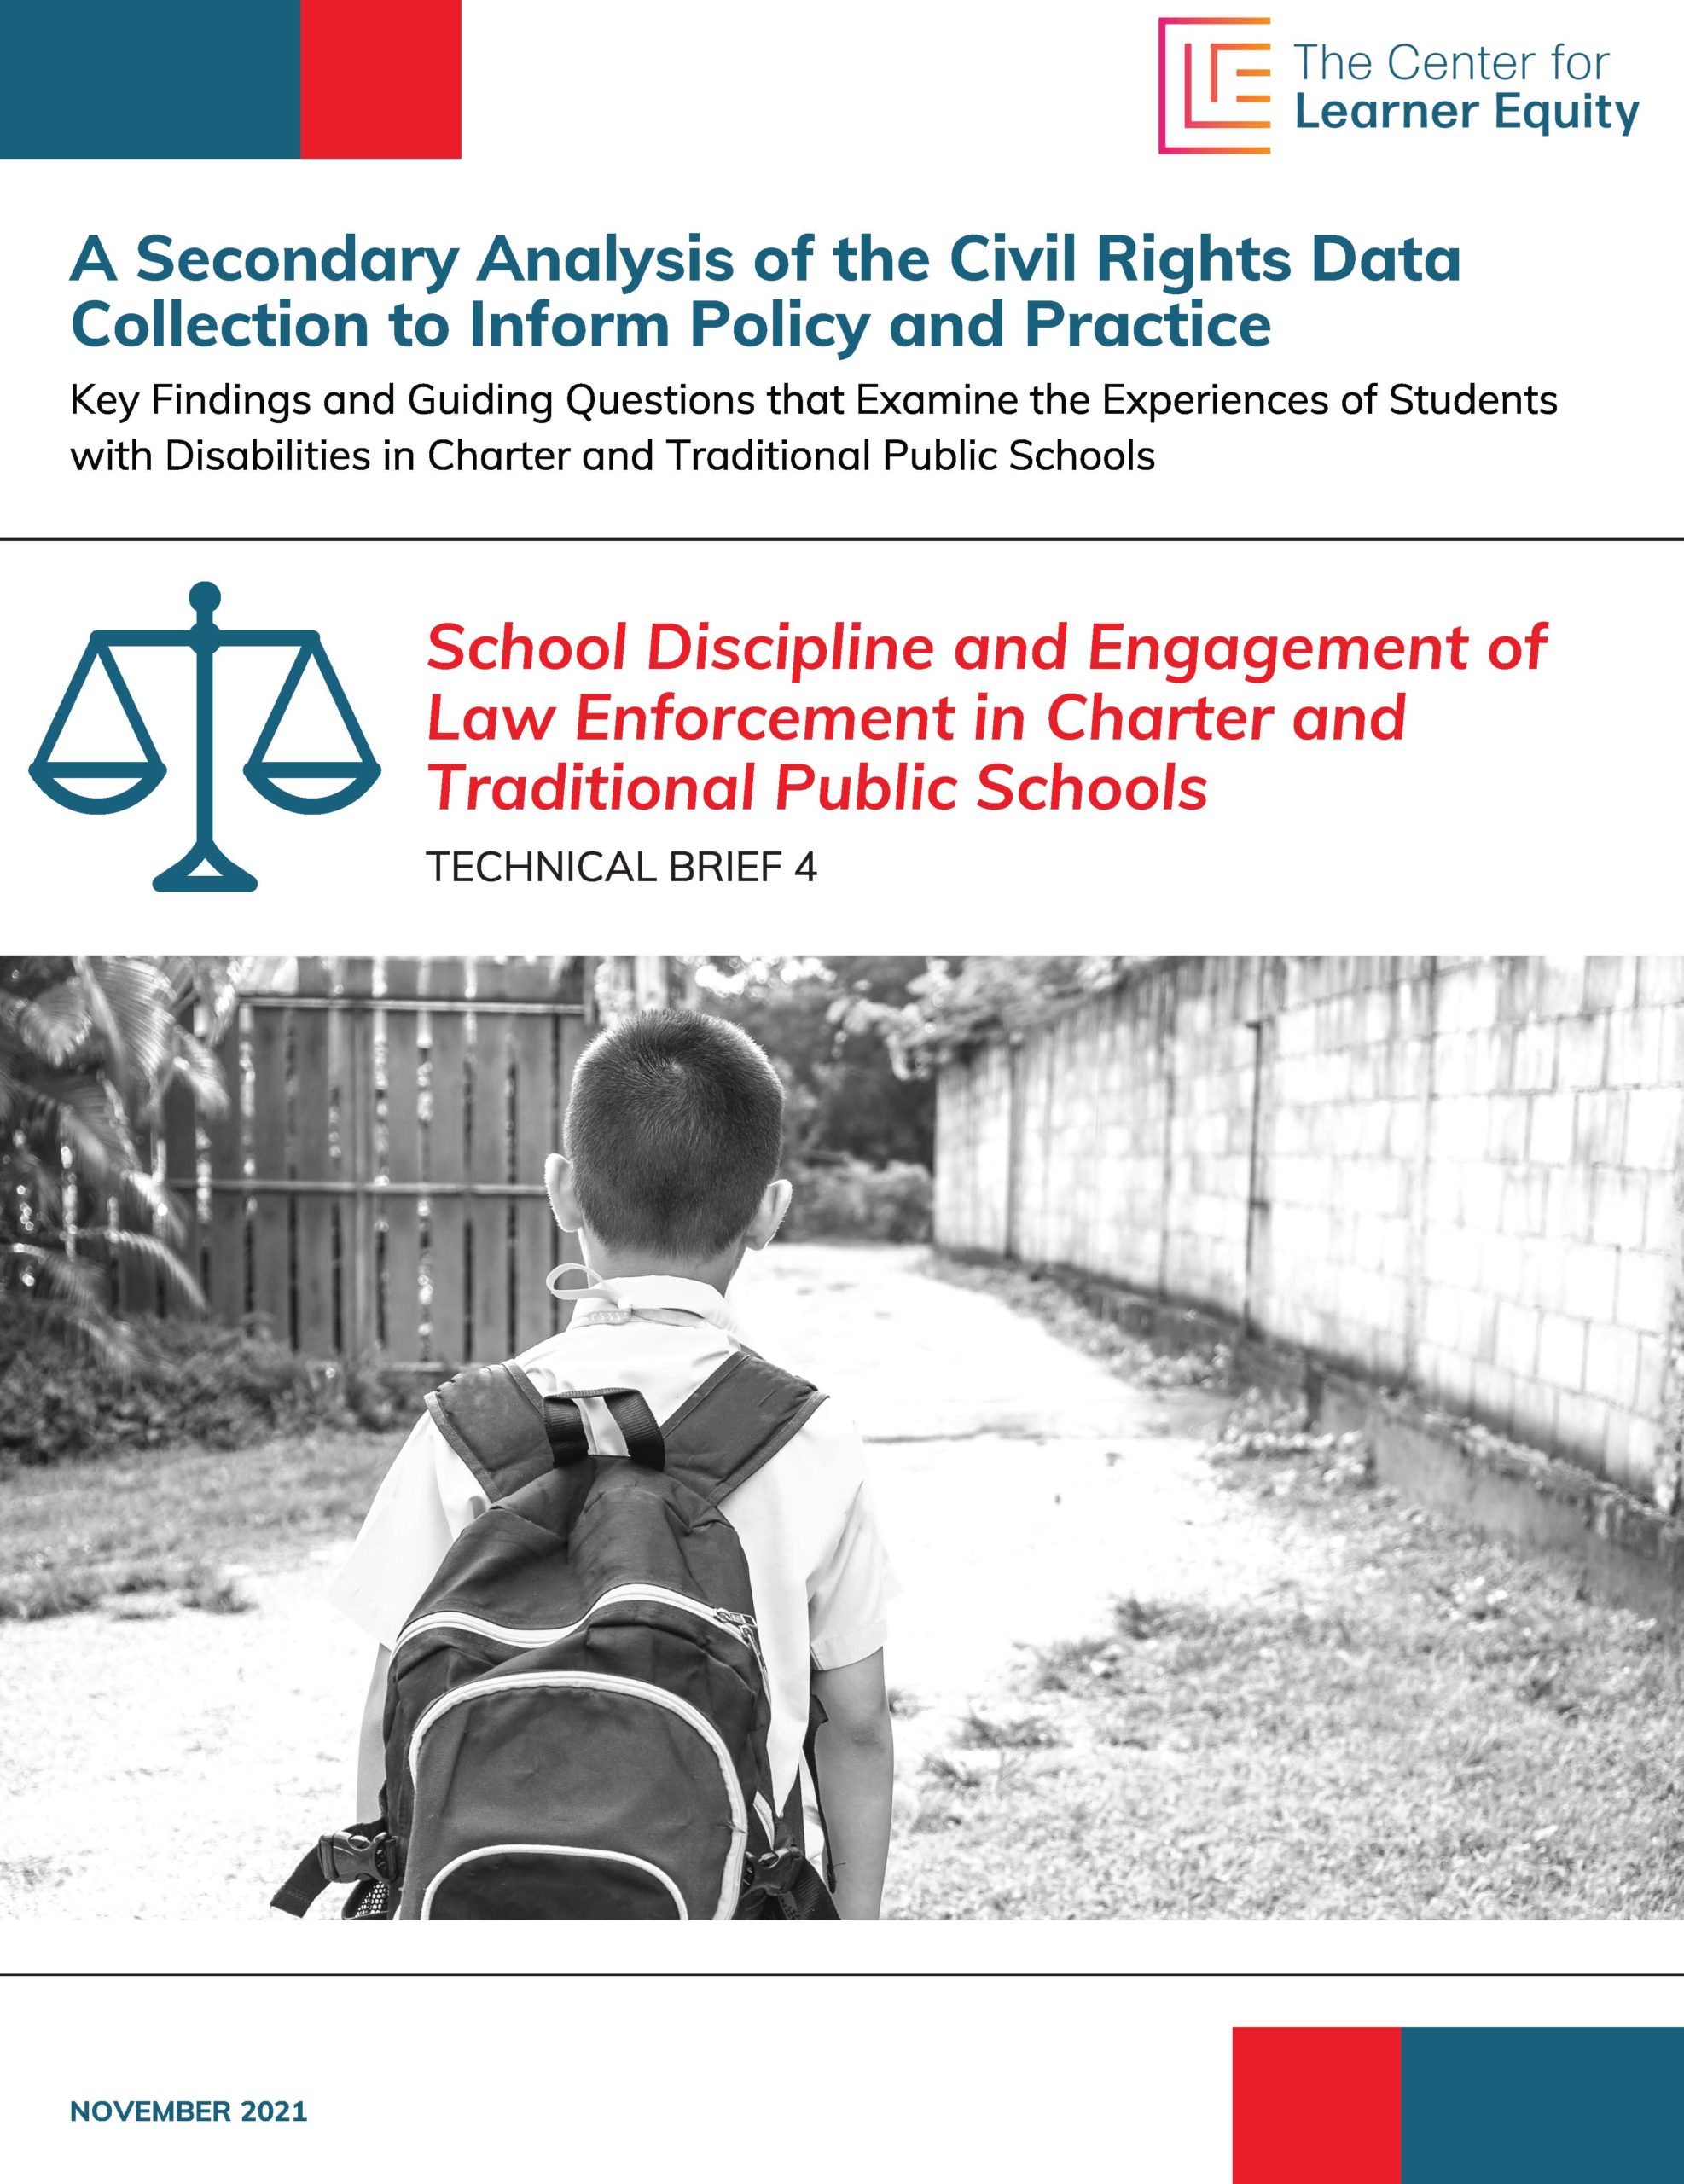 School Discipline and Engagement of Law Enforcement in Charter Schools Technical Brief Cover